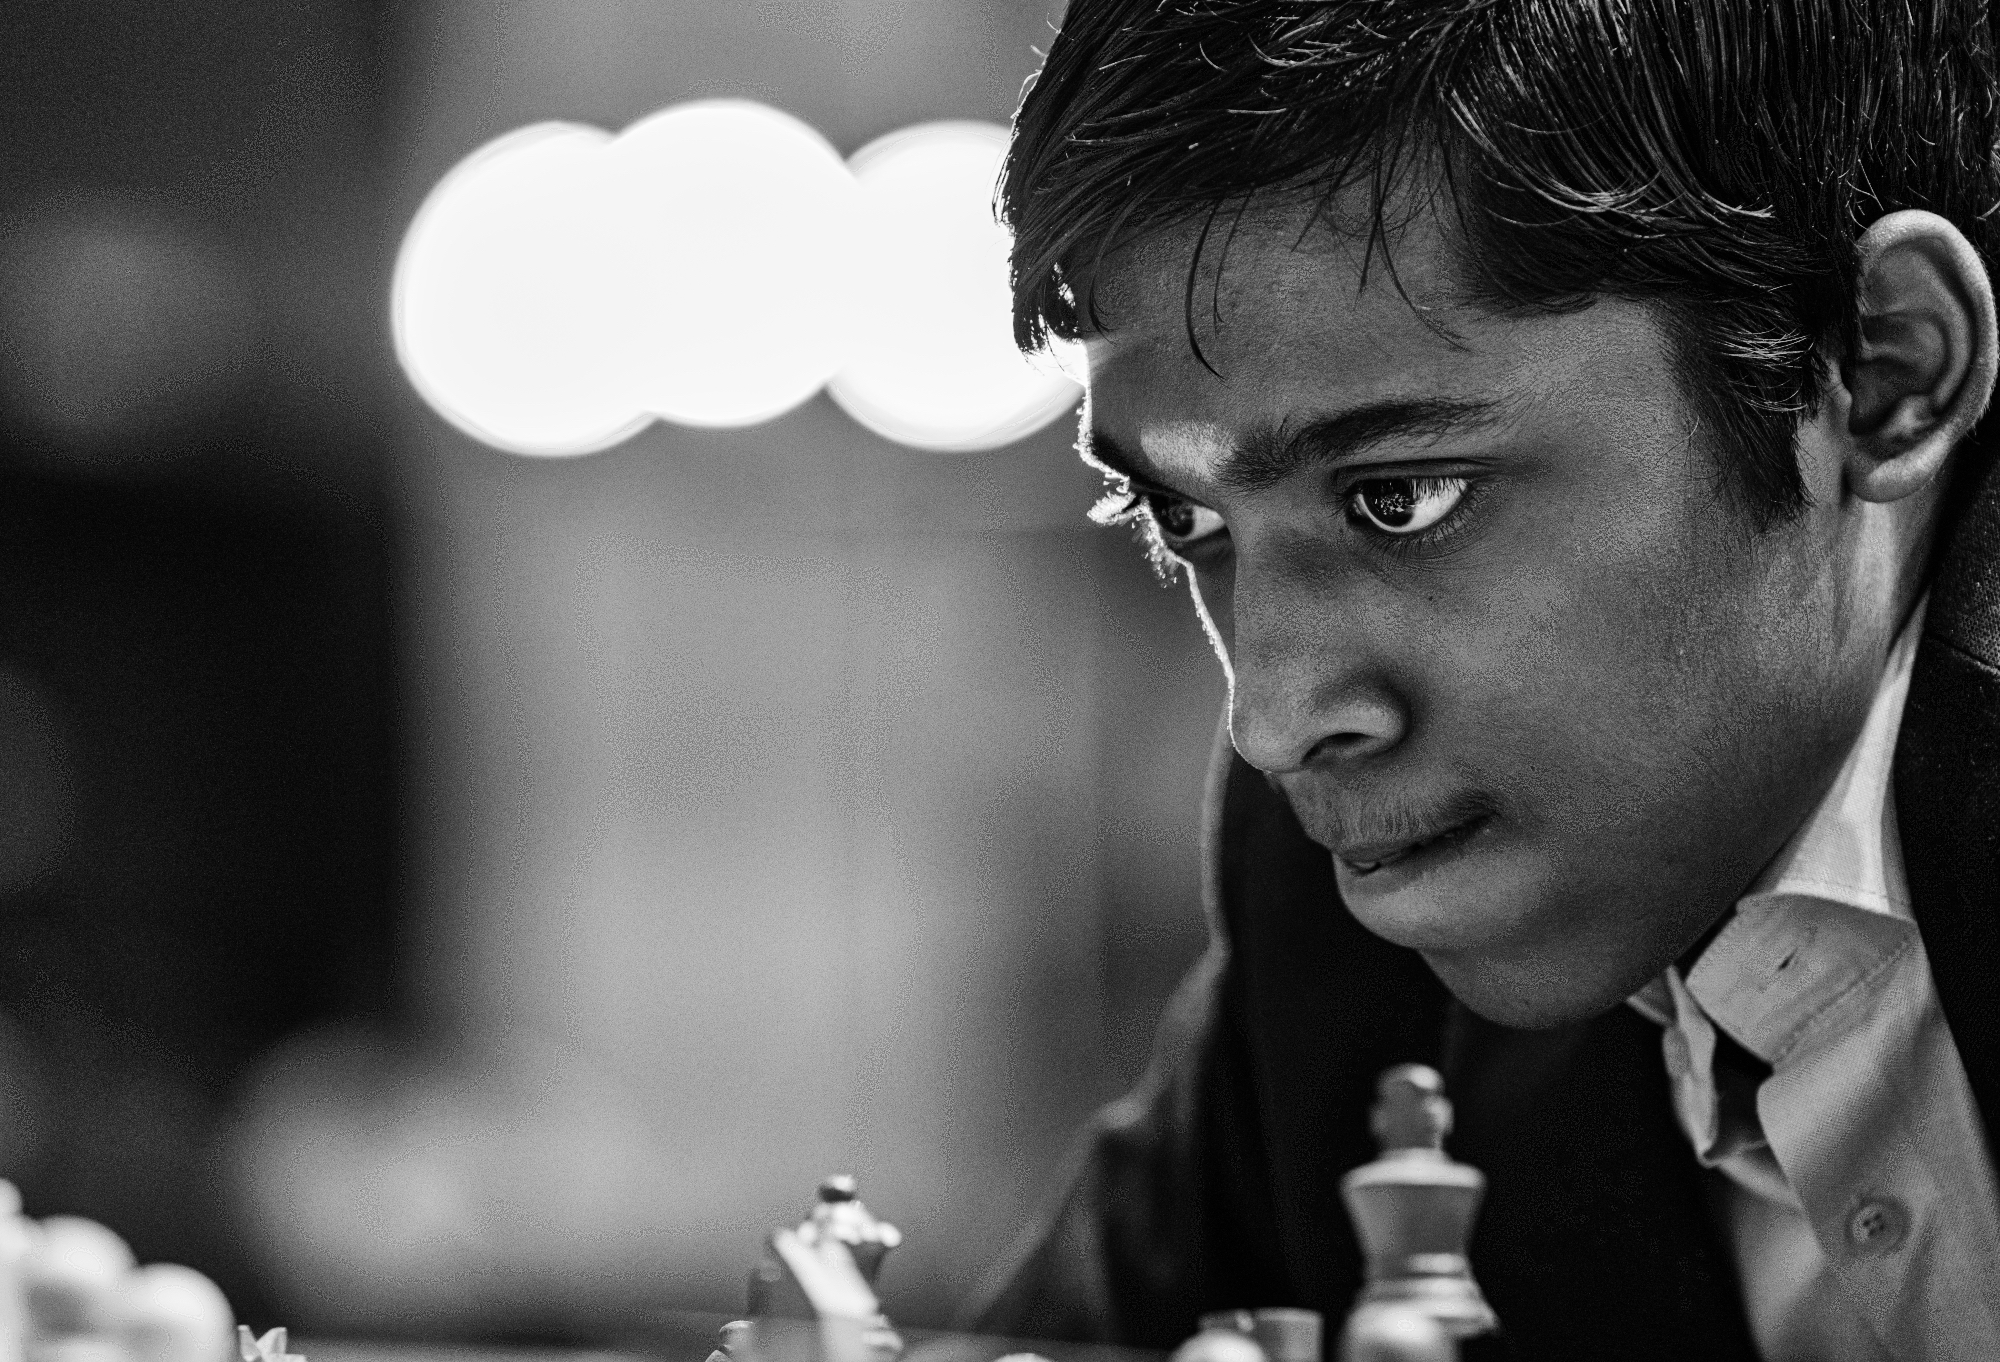 Praggnanandhaa in sole lead at Xtracon chess with 6.5/7 and a